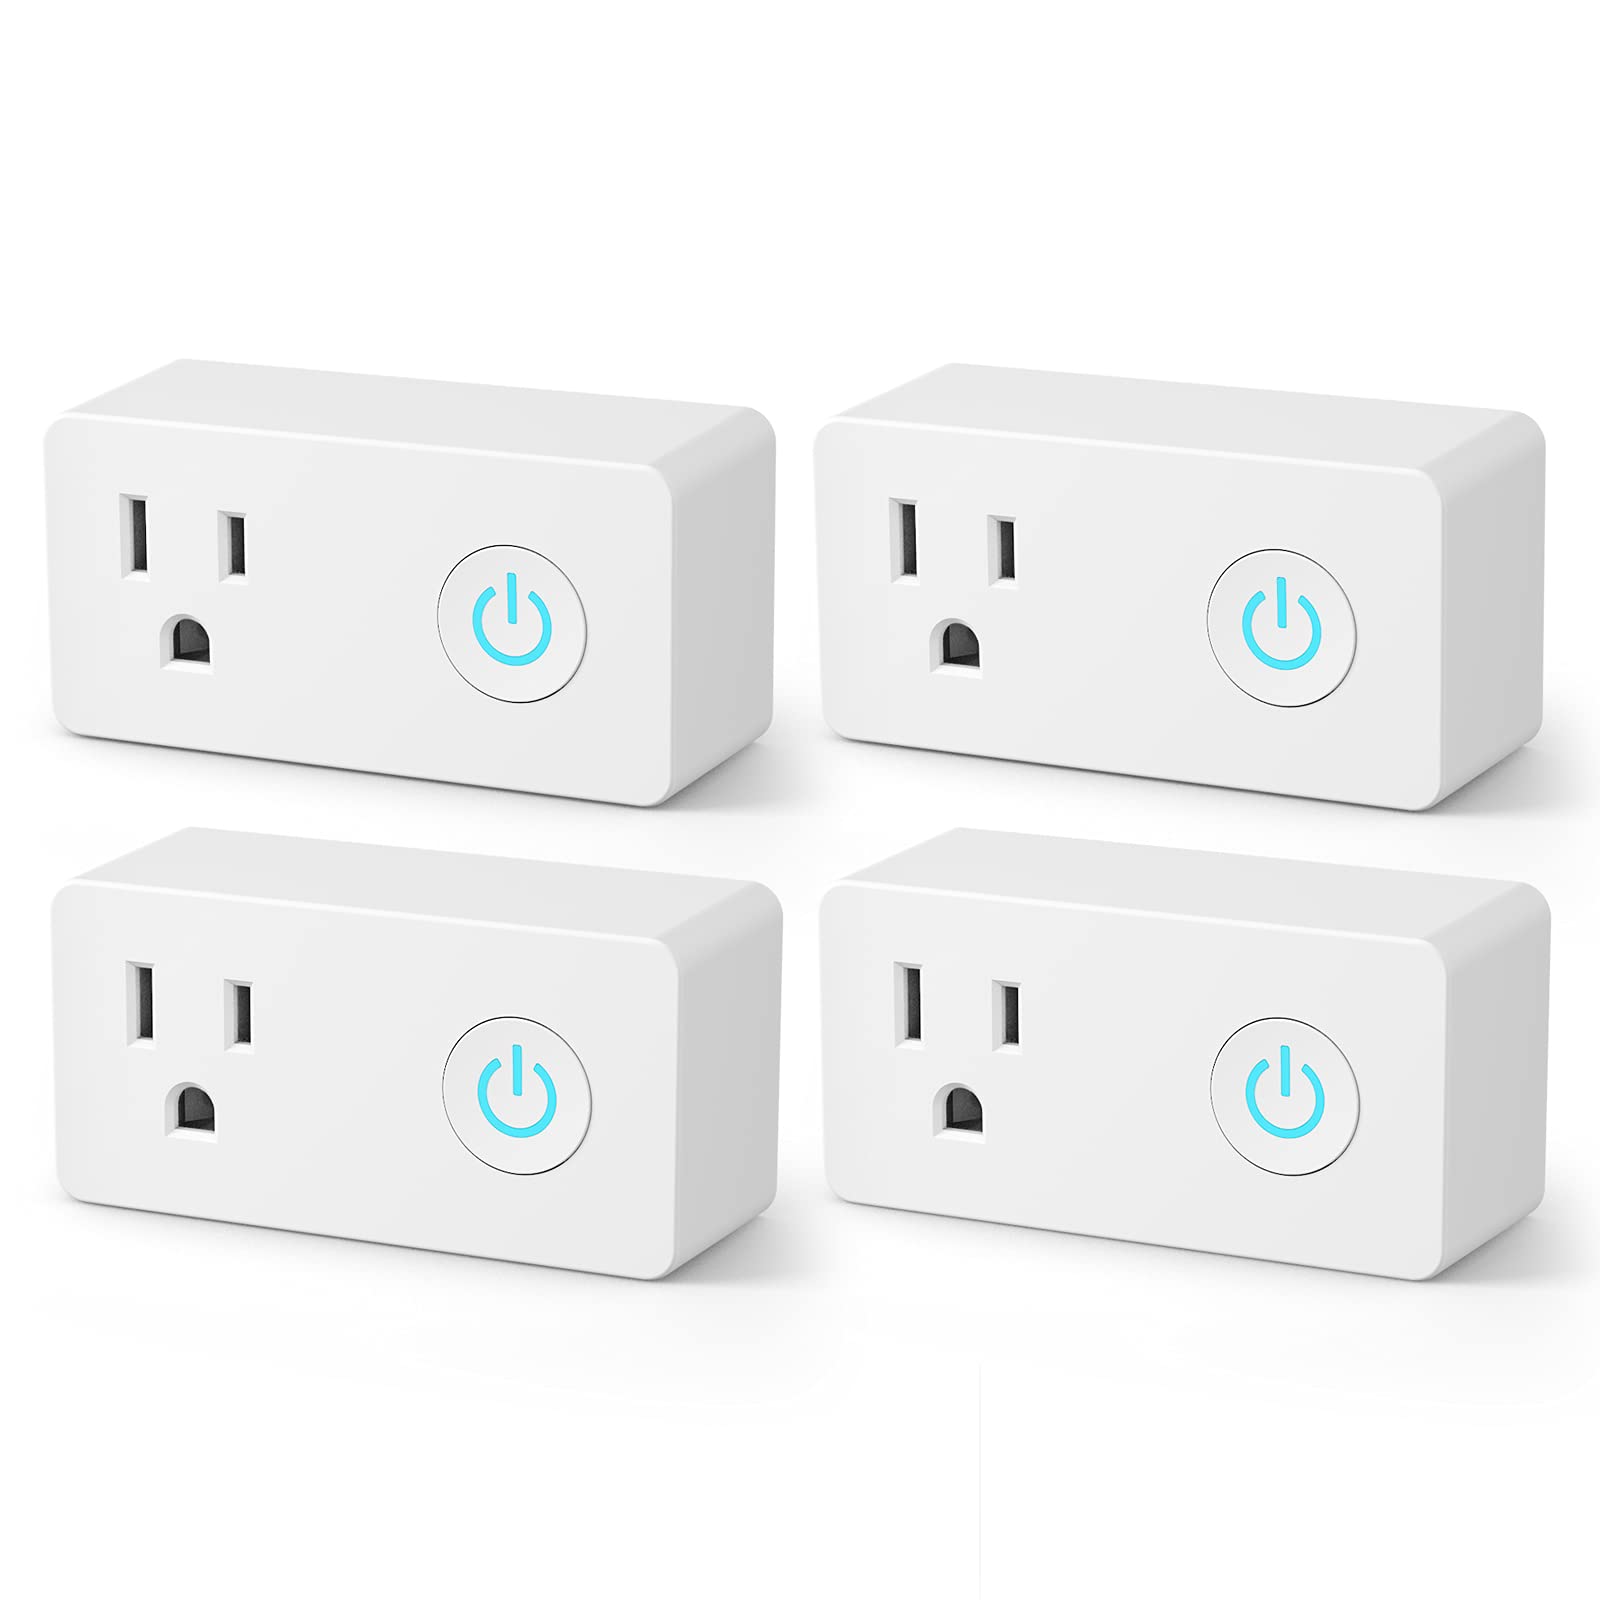 Govee Smart Plug Wifi Bluetooth Outlet Work with Alexa, Google Assistant  15A (2)